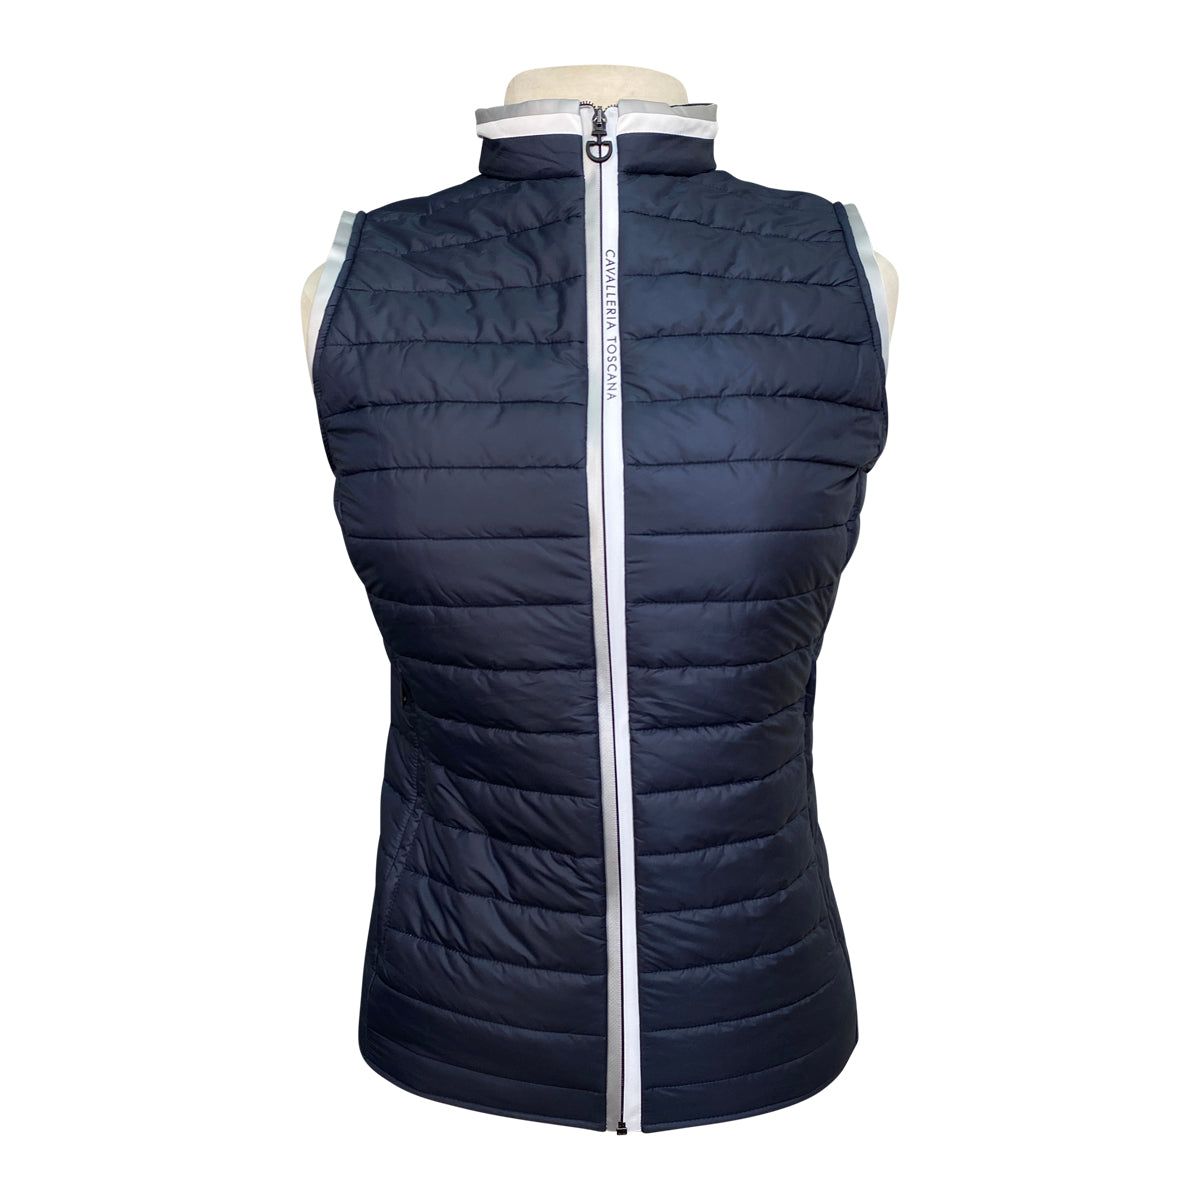 Cavalleria Toscana Ultralight Packable Quilted Vest in Navy - Unisex S –  The Tried Equestrian